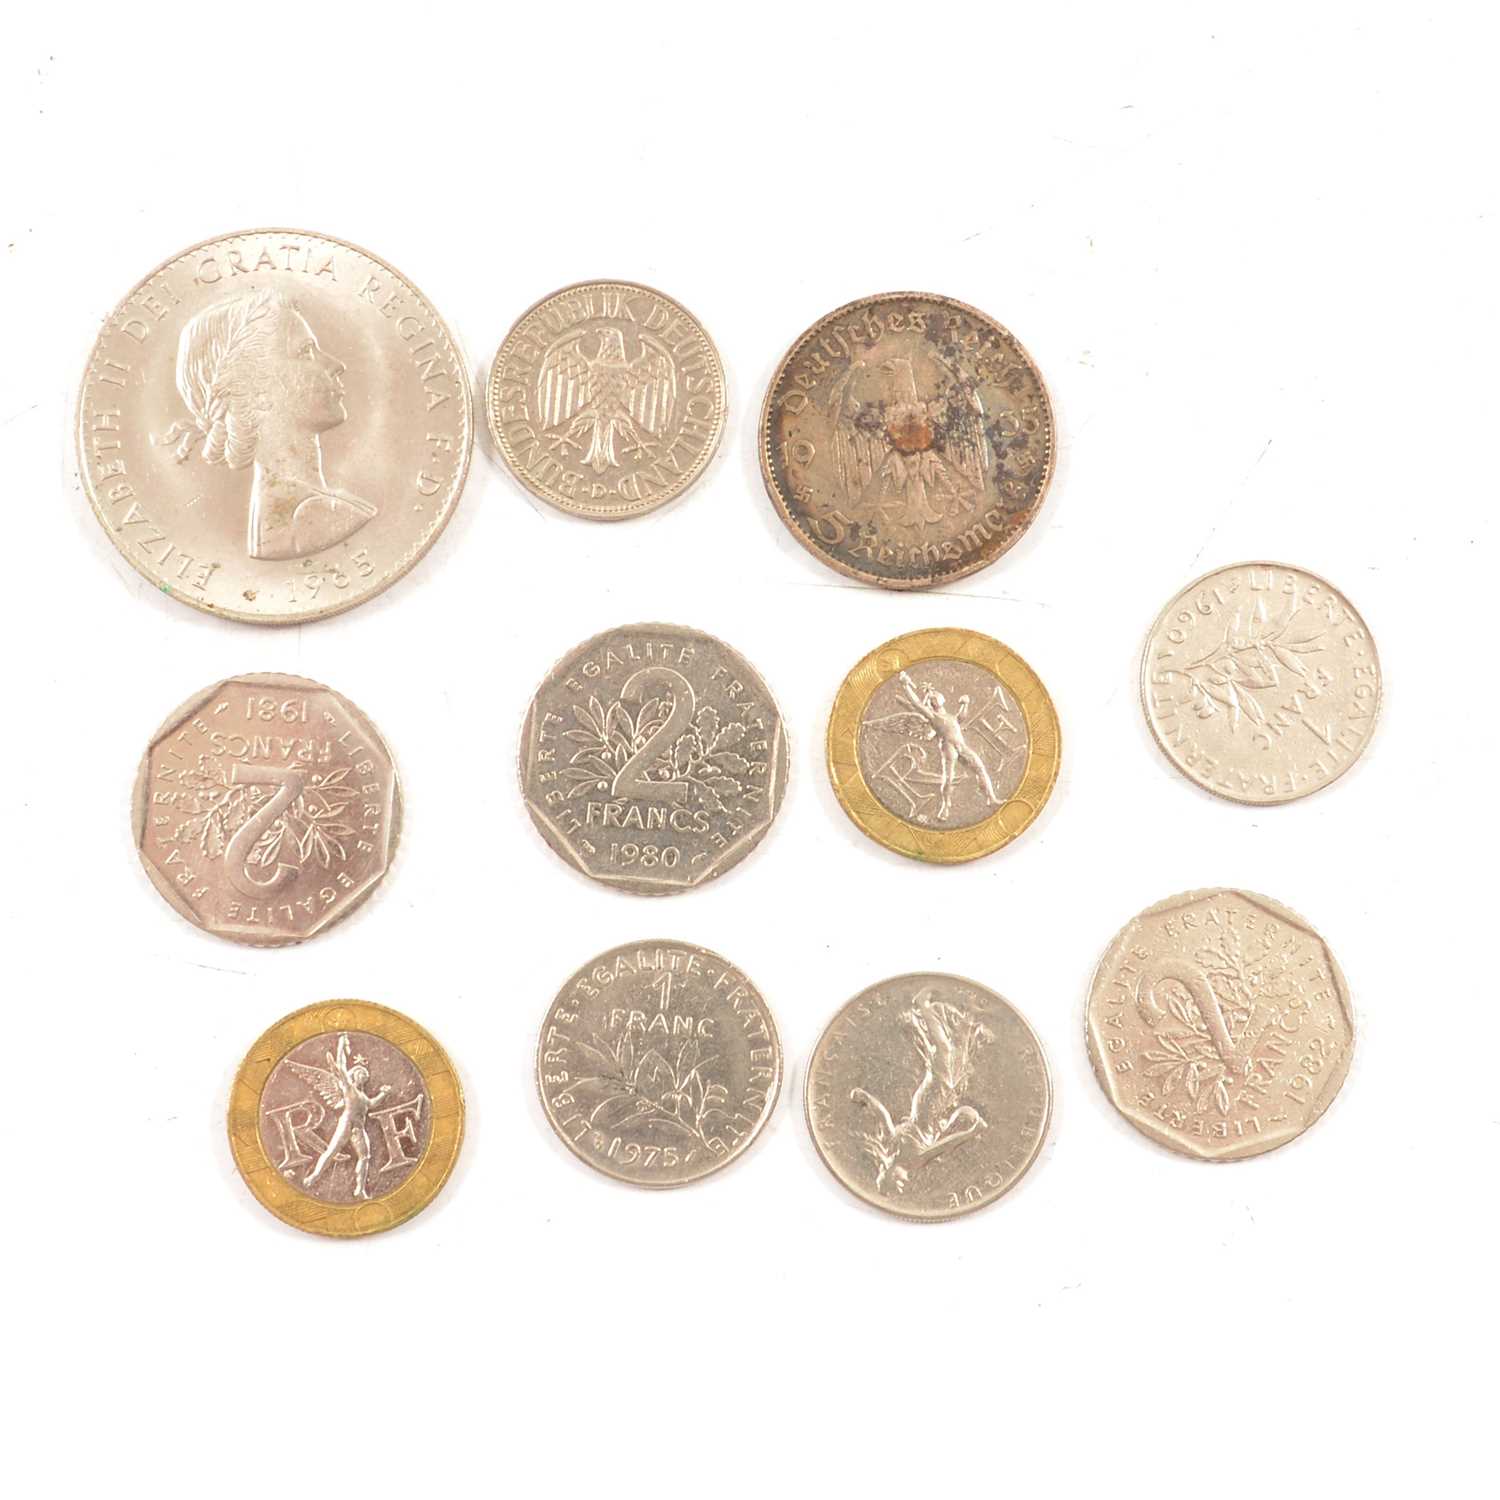 Lot 173 - Collection of British and foreign coins and banknotes.